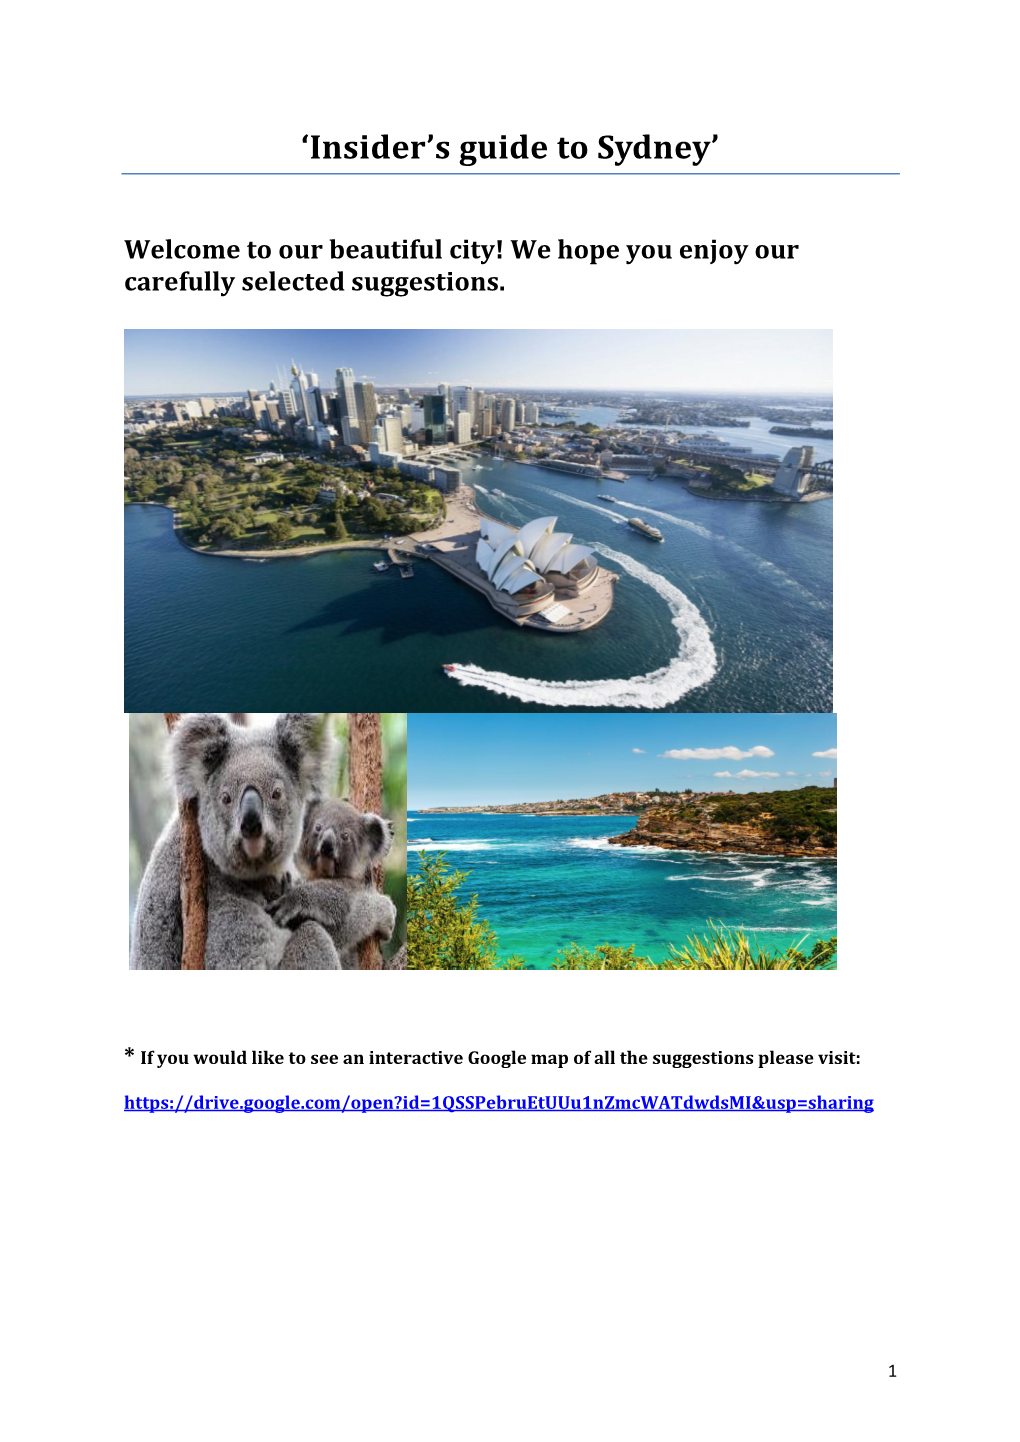 'Insider's Guide to Sydney'